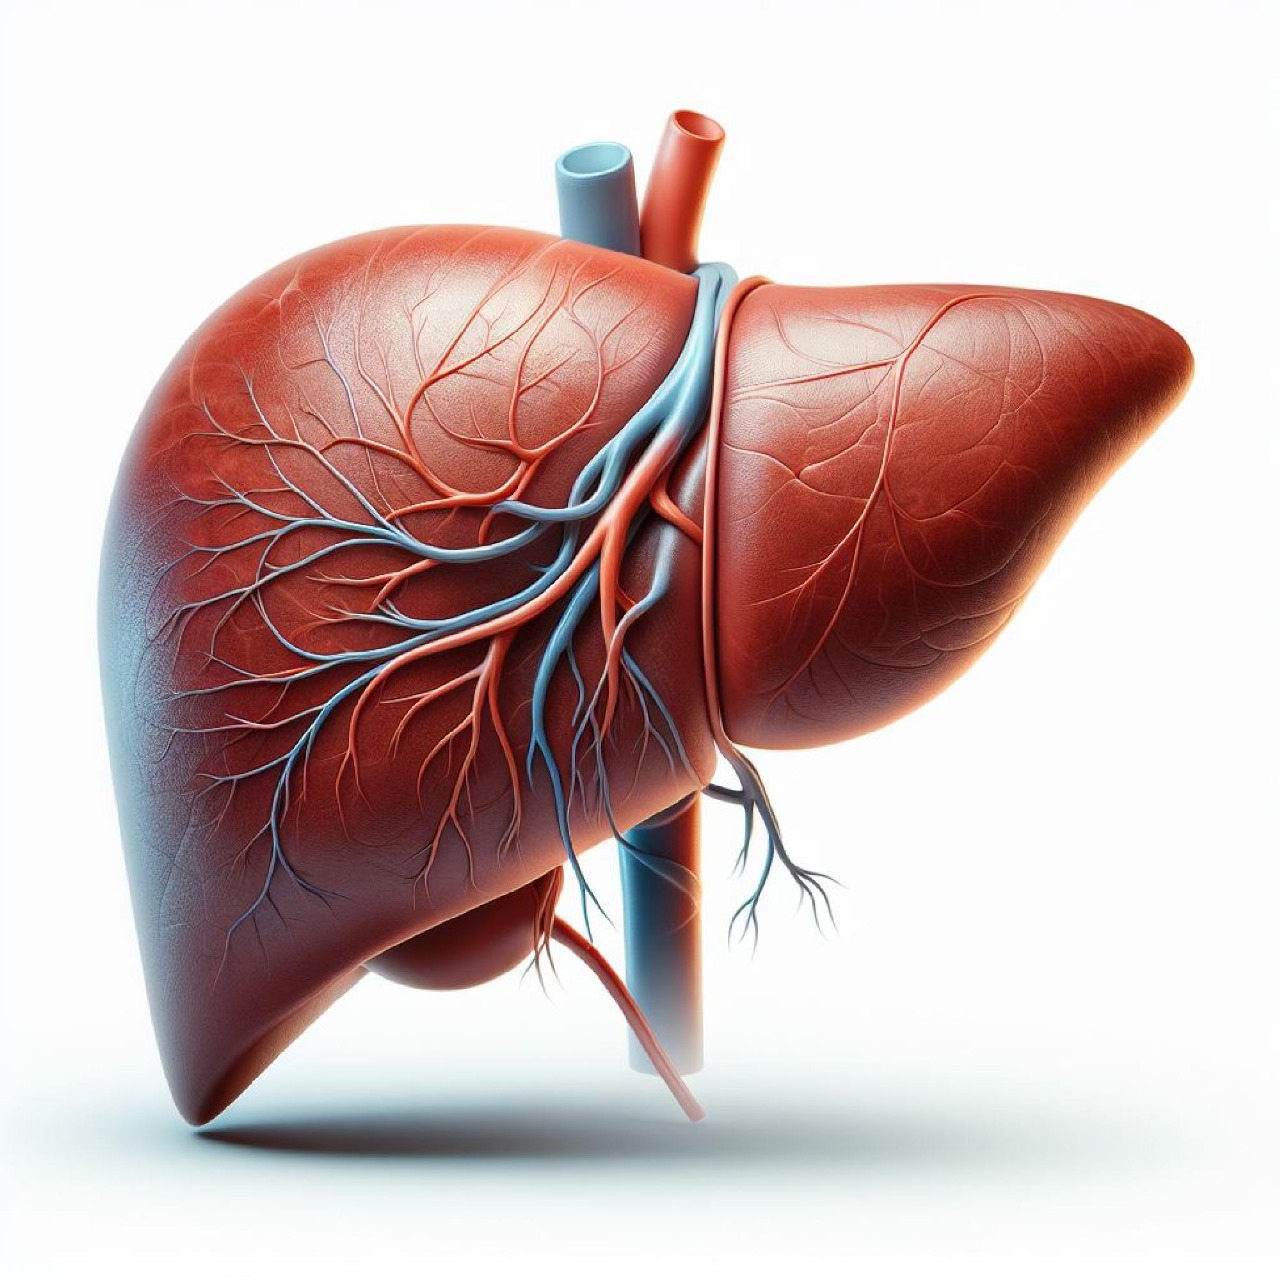 What Ayurvedic supplement can be used to improve liver function?